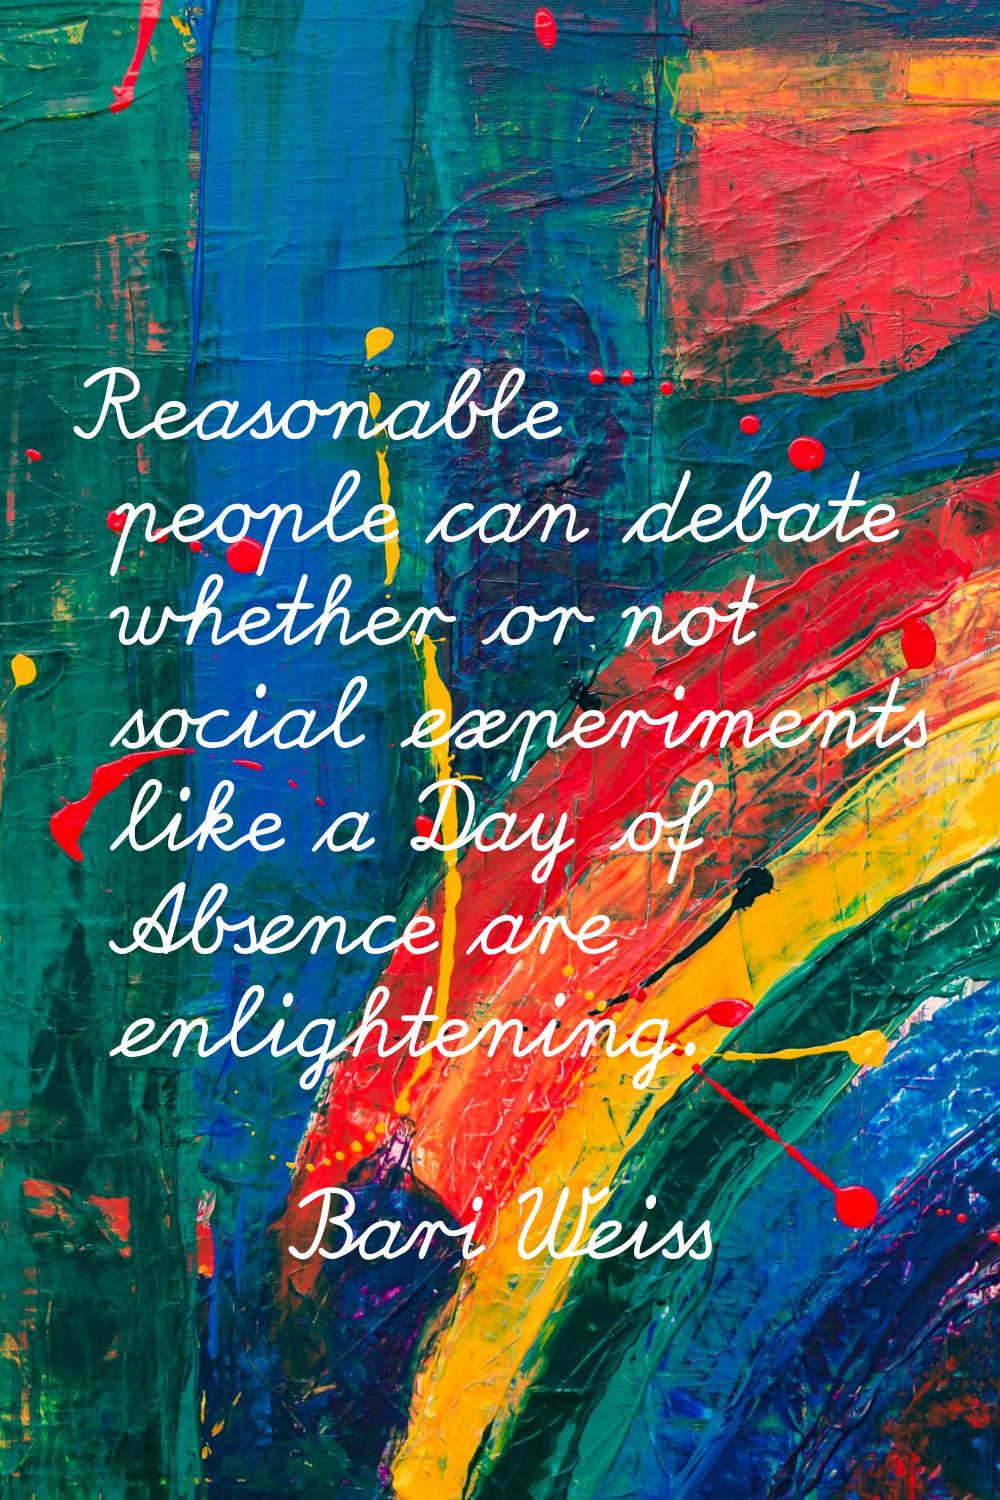 Reasonable people can debate whether or not social experiments like a Day of Absence are enlighteni